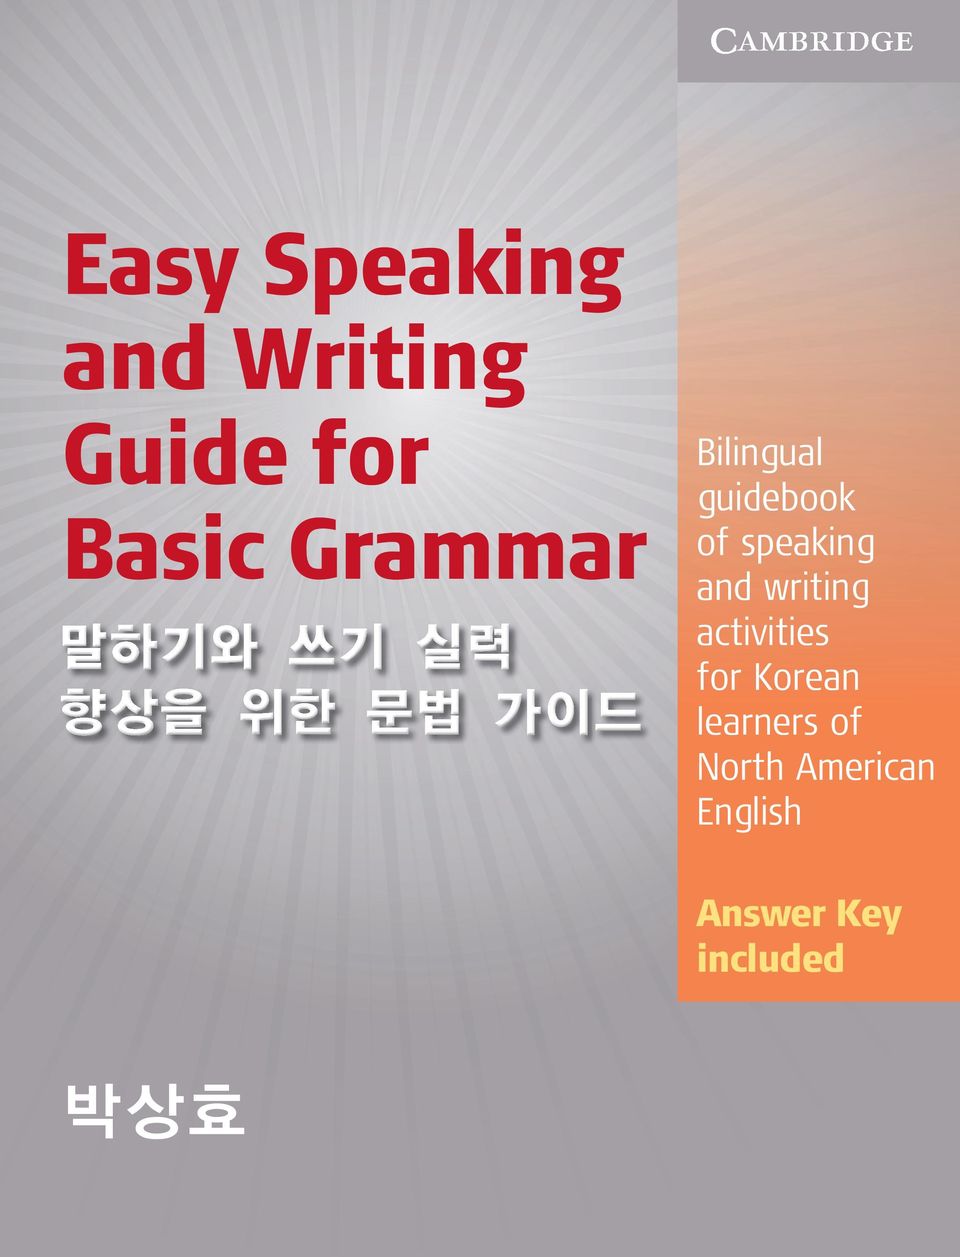 speaking and writing activities for Korean